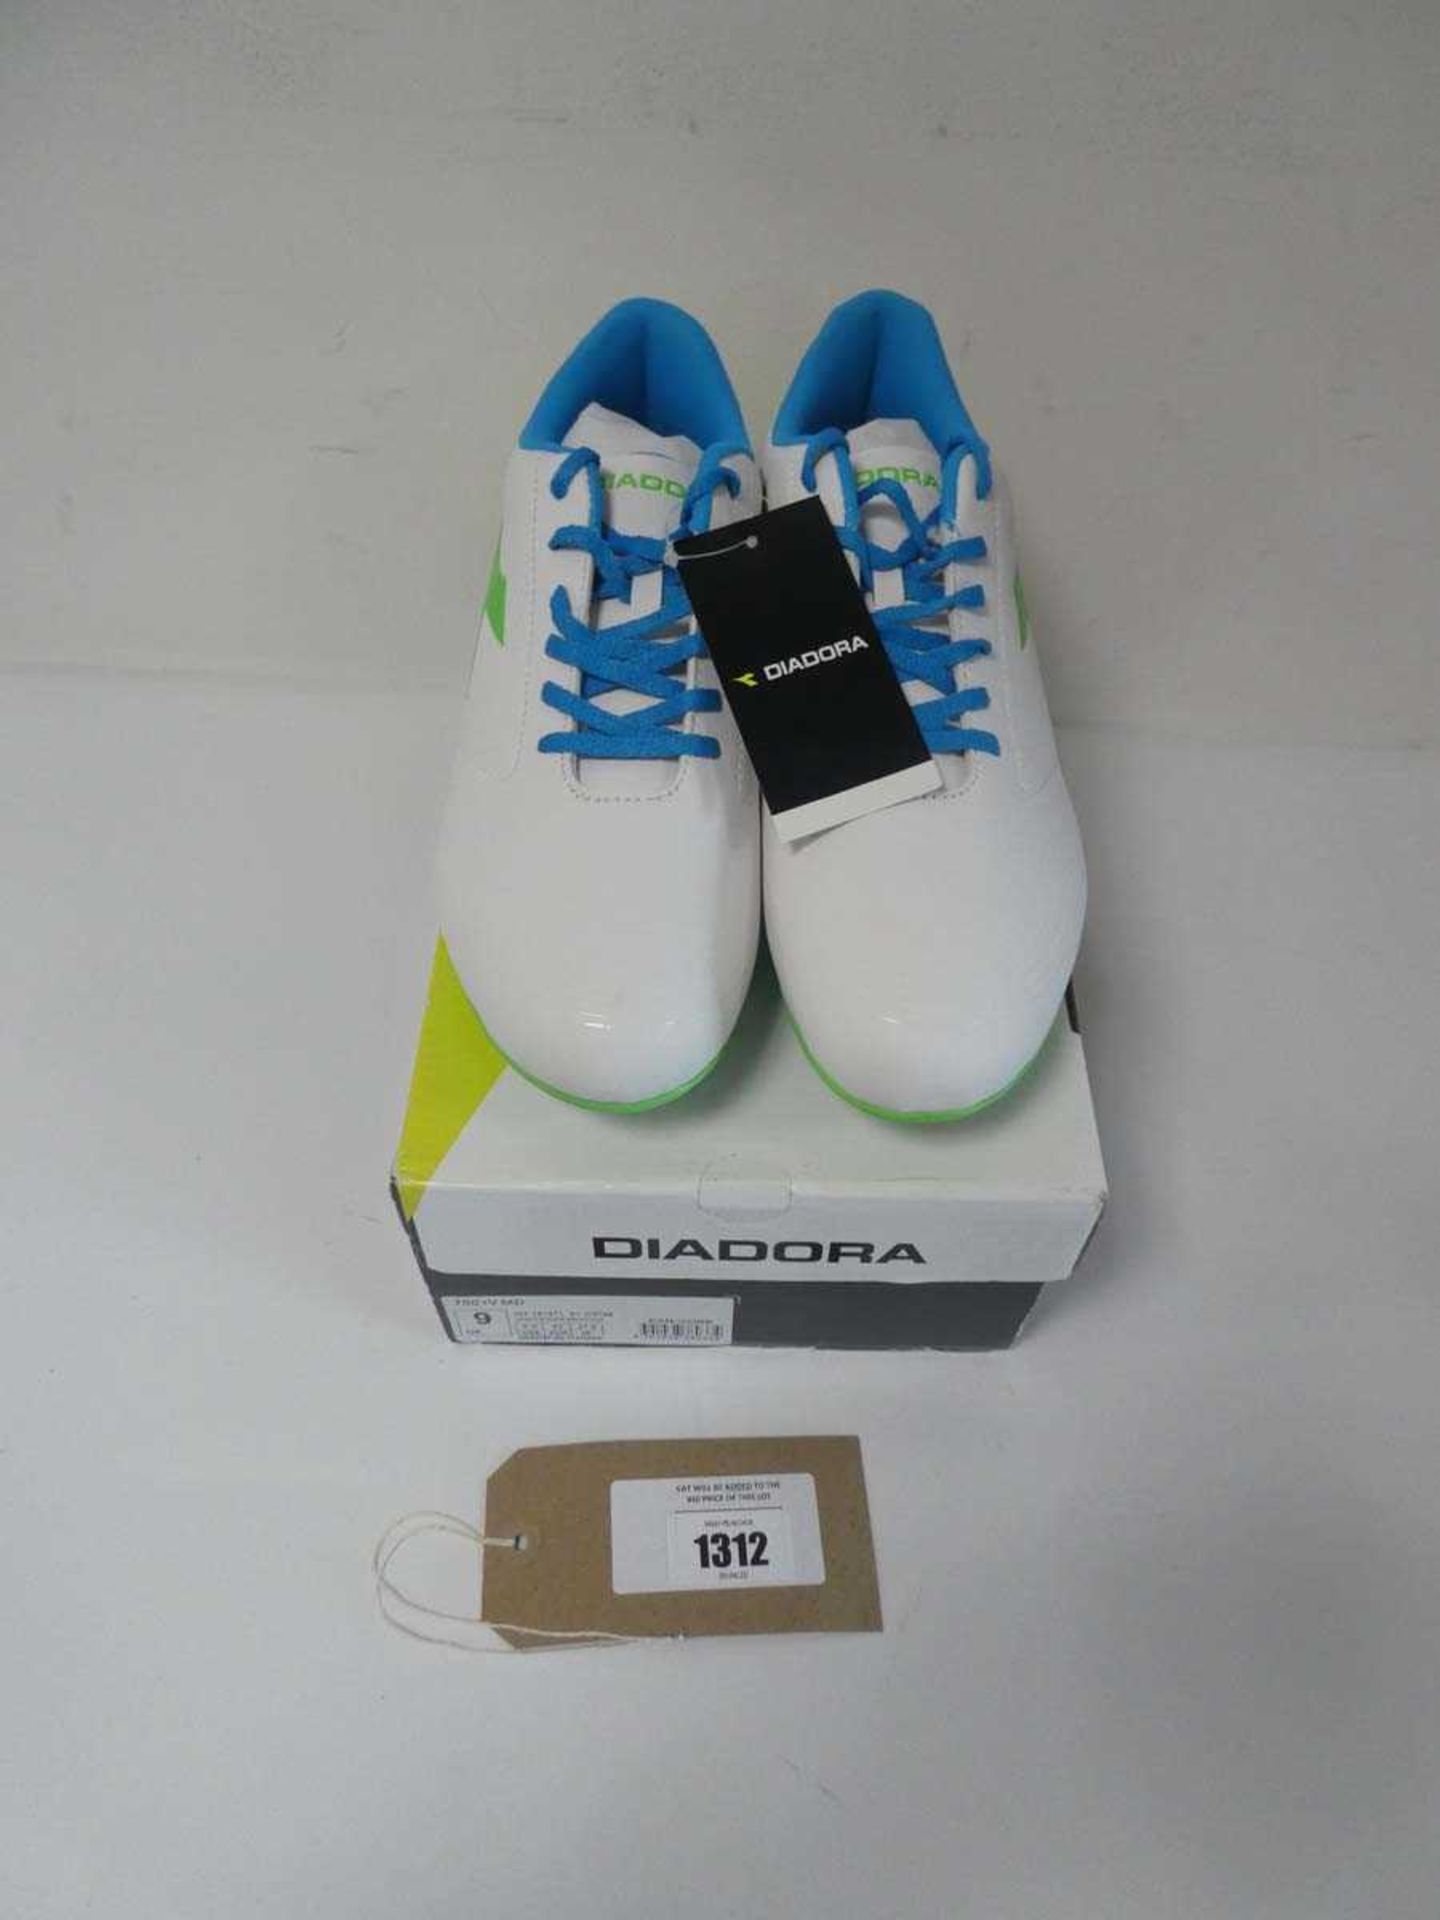 +VAT Diadora shoes in white/green size UK9 (boxed)